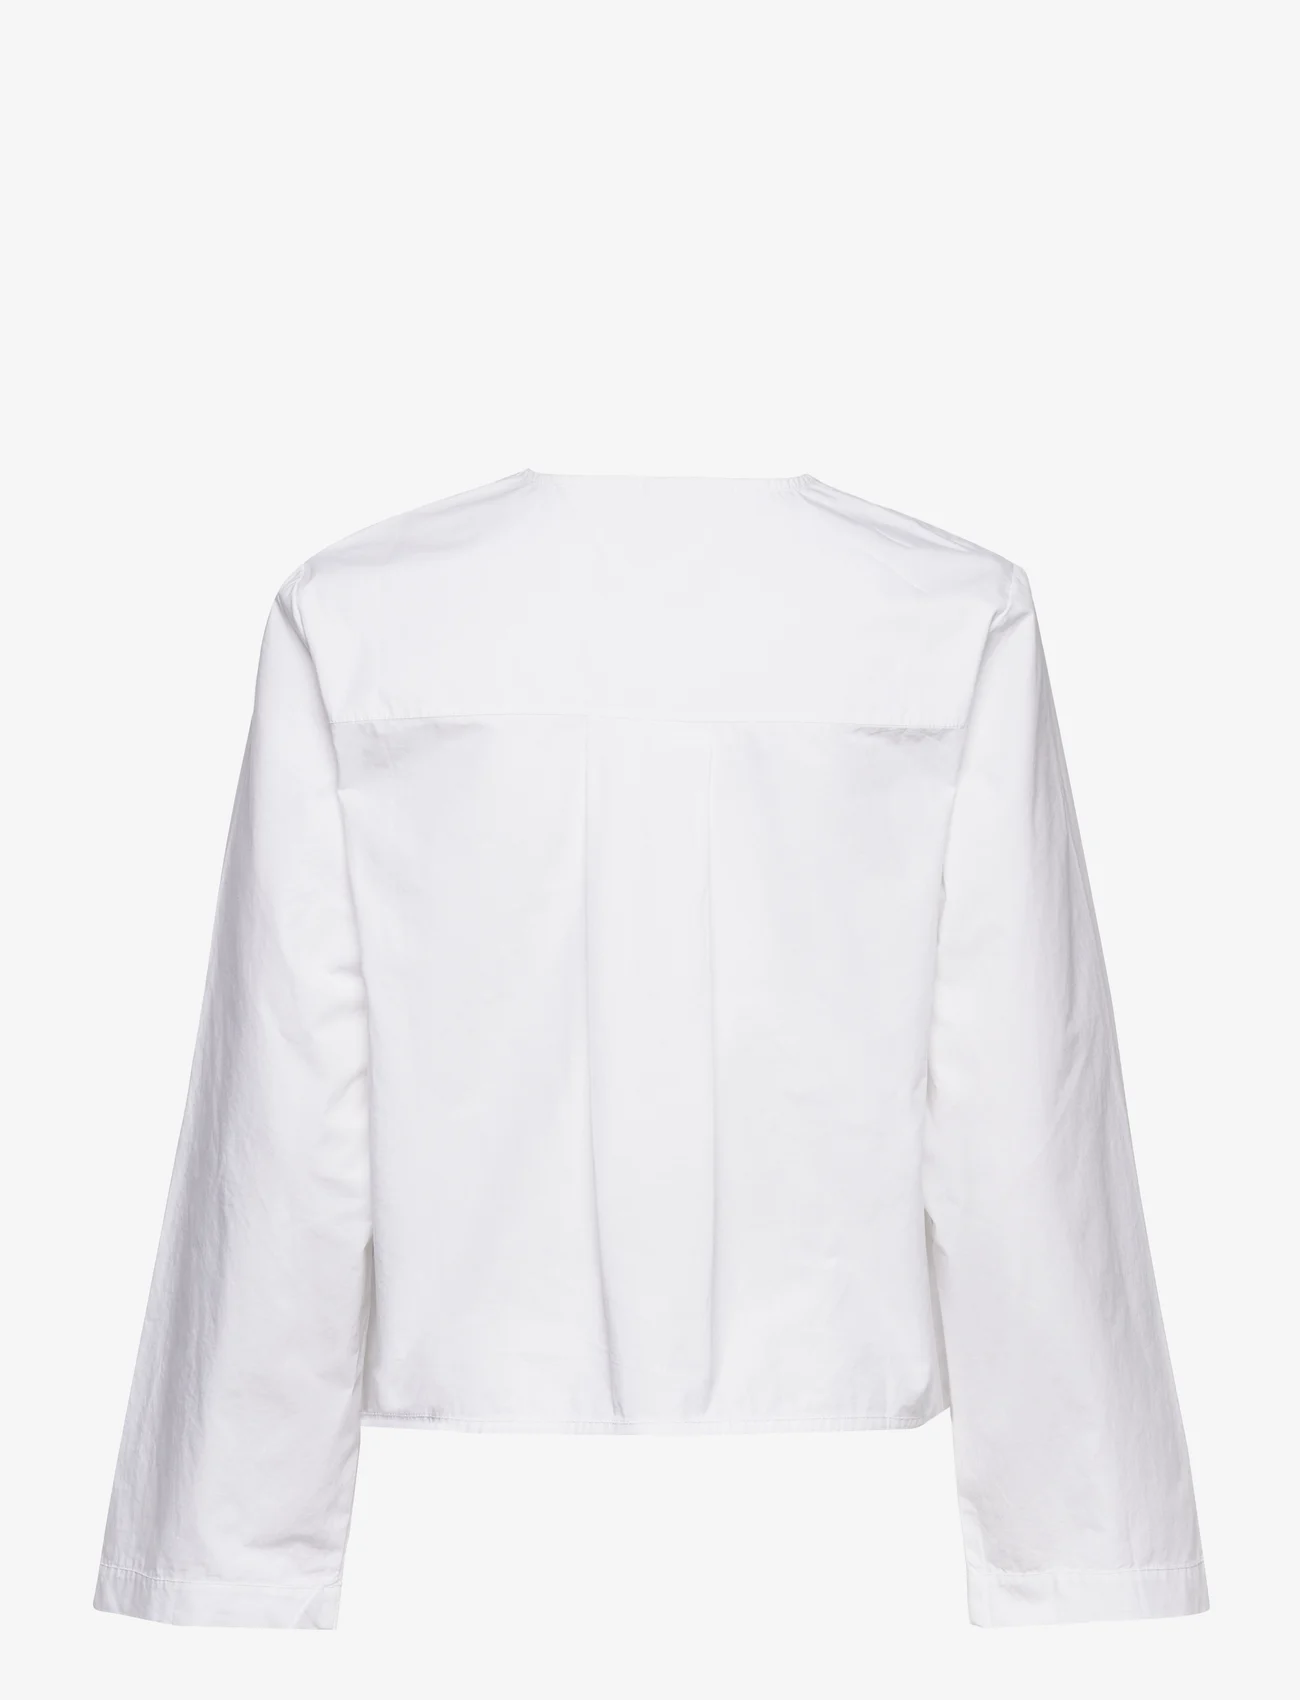 Tommy Hilfiger - COTTON SOLID V-NECK BLOUSE - long-sleeved blouses - th optic white - 1